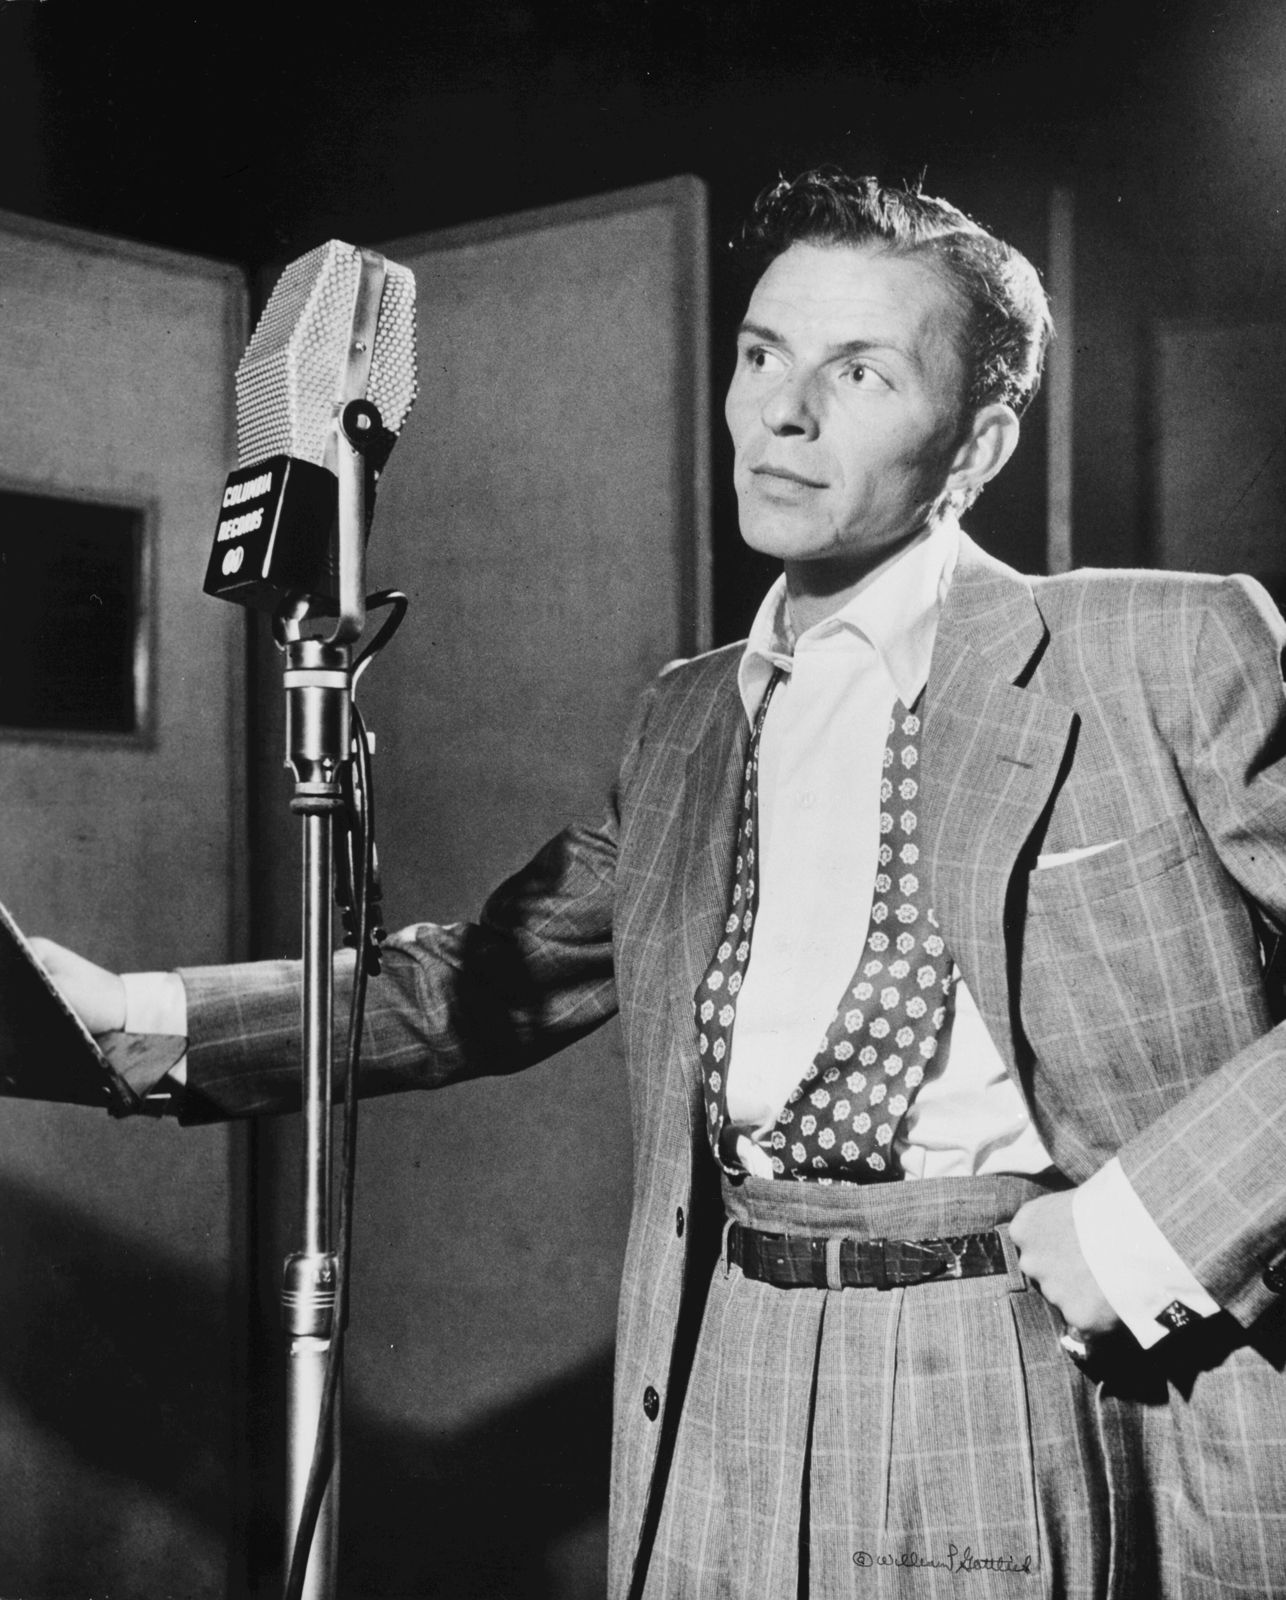 Frank Sinatra | Biography, Songs, Films, & Facts | Britannica